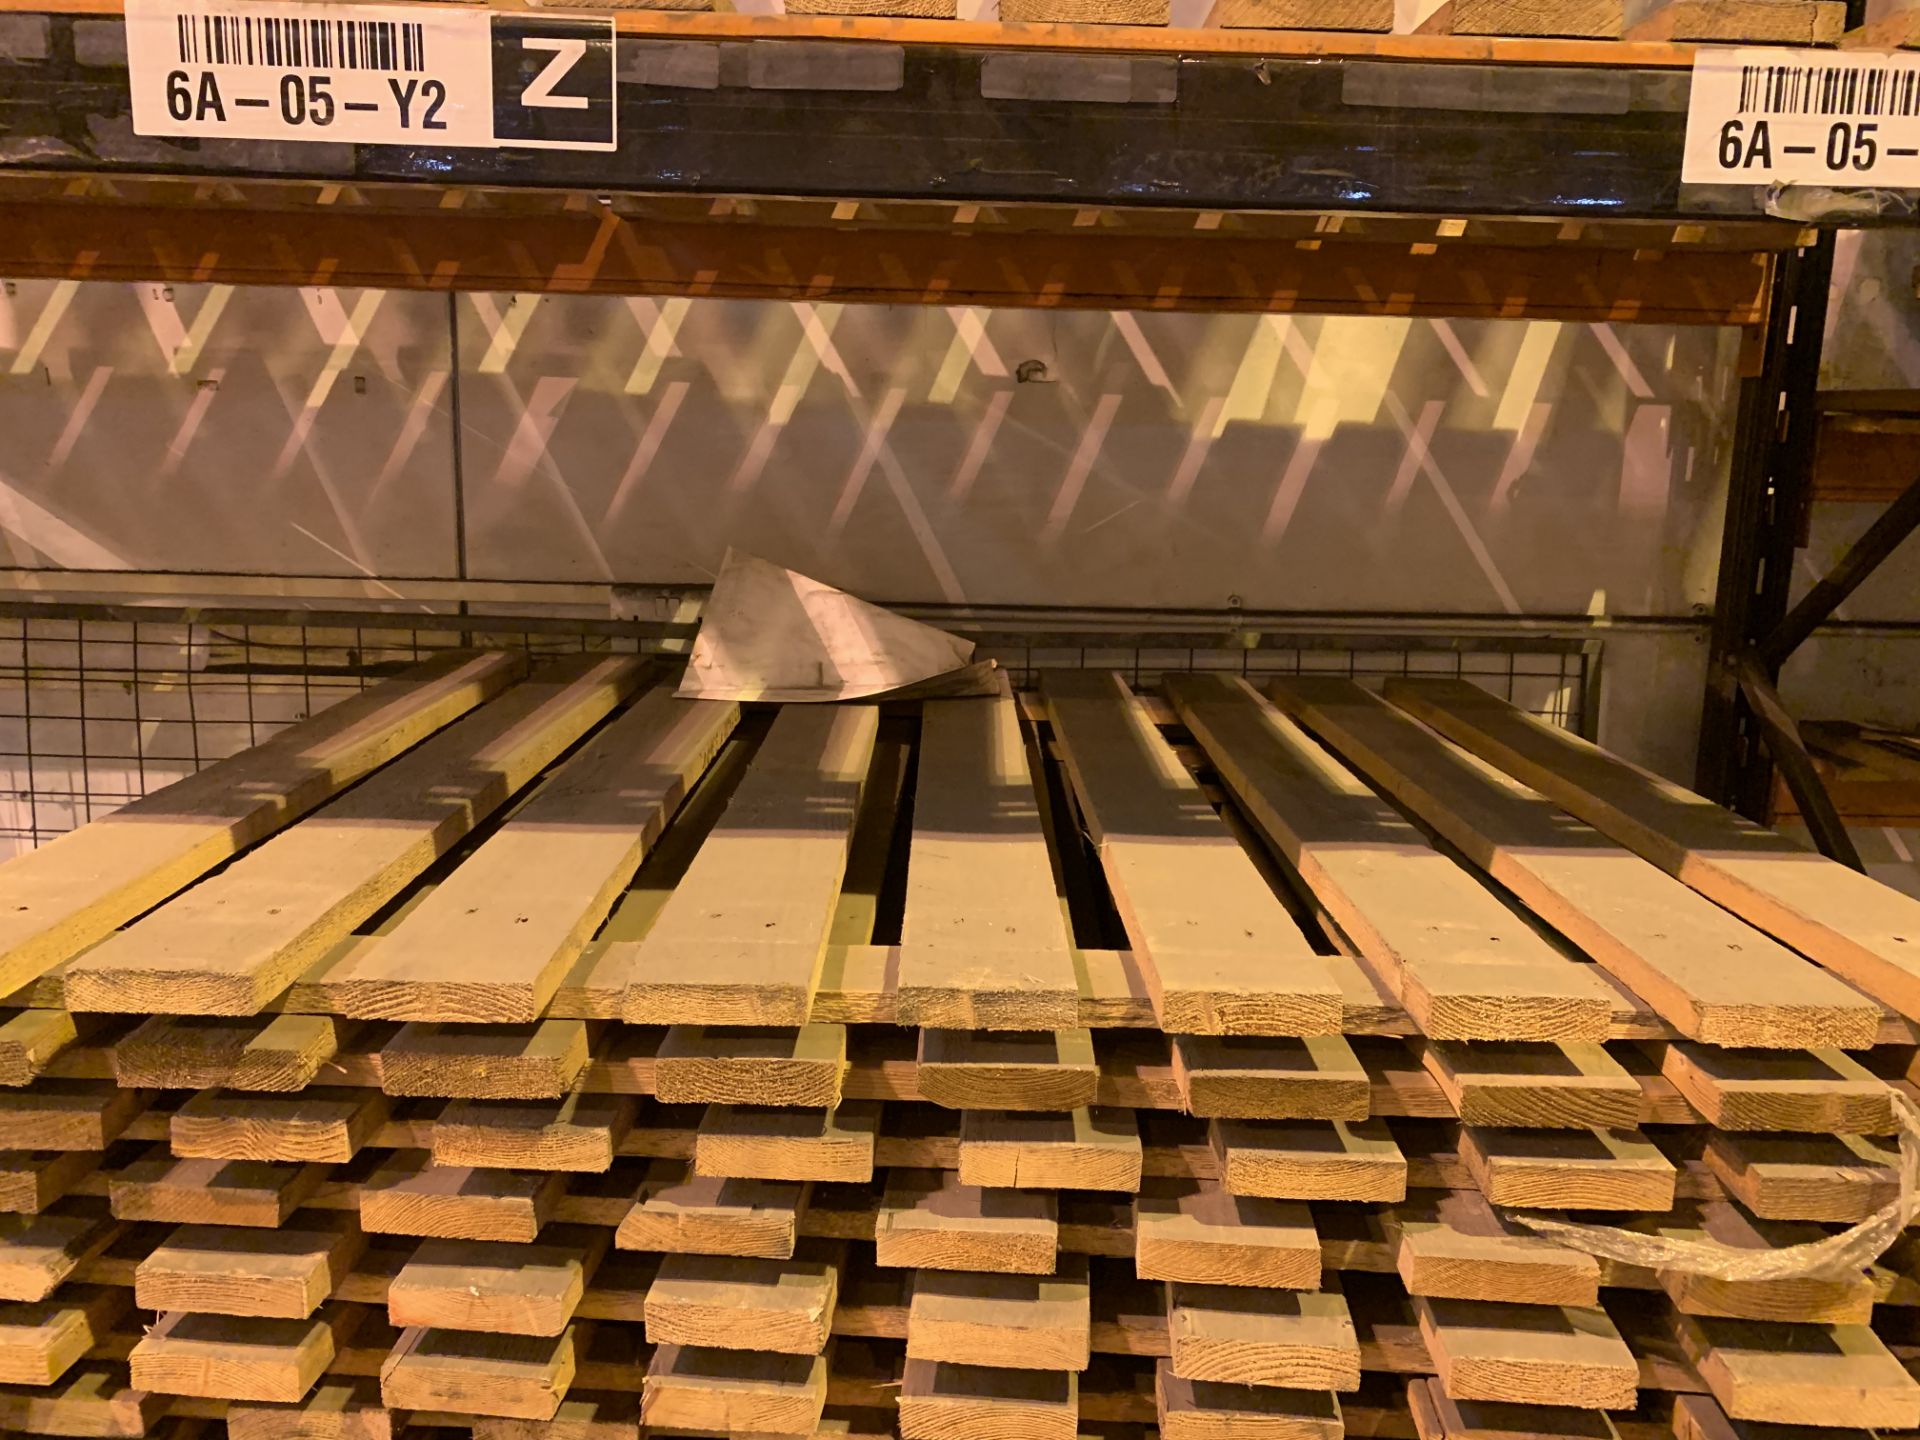 100 X ASSORTED PALLET RACKING BOARDS ON 8 PALLETS - Image 2 of 3